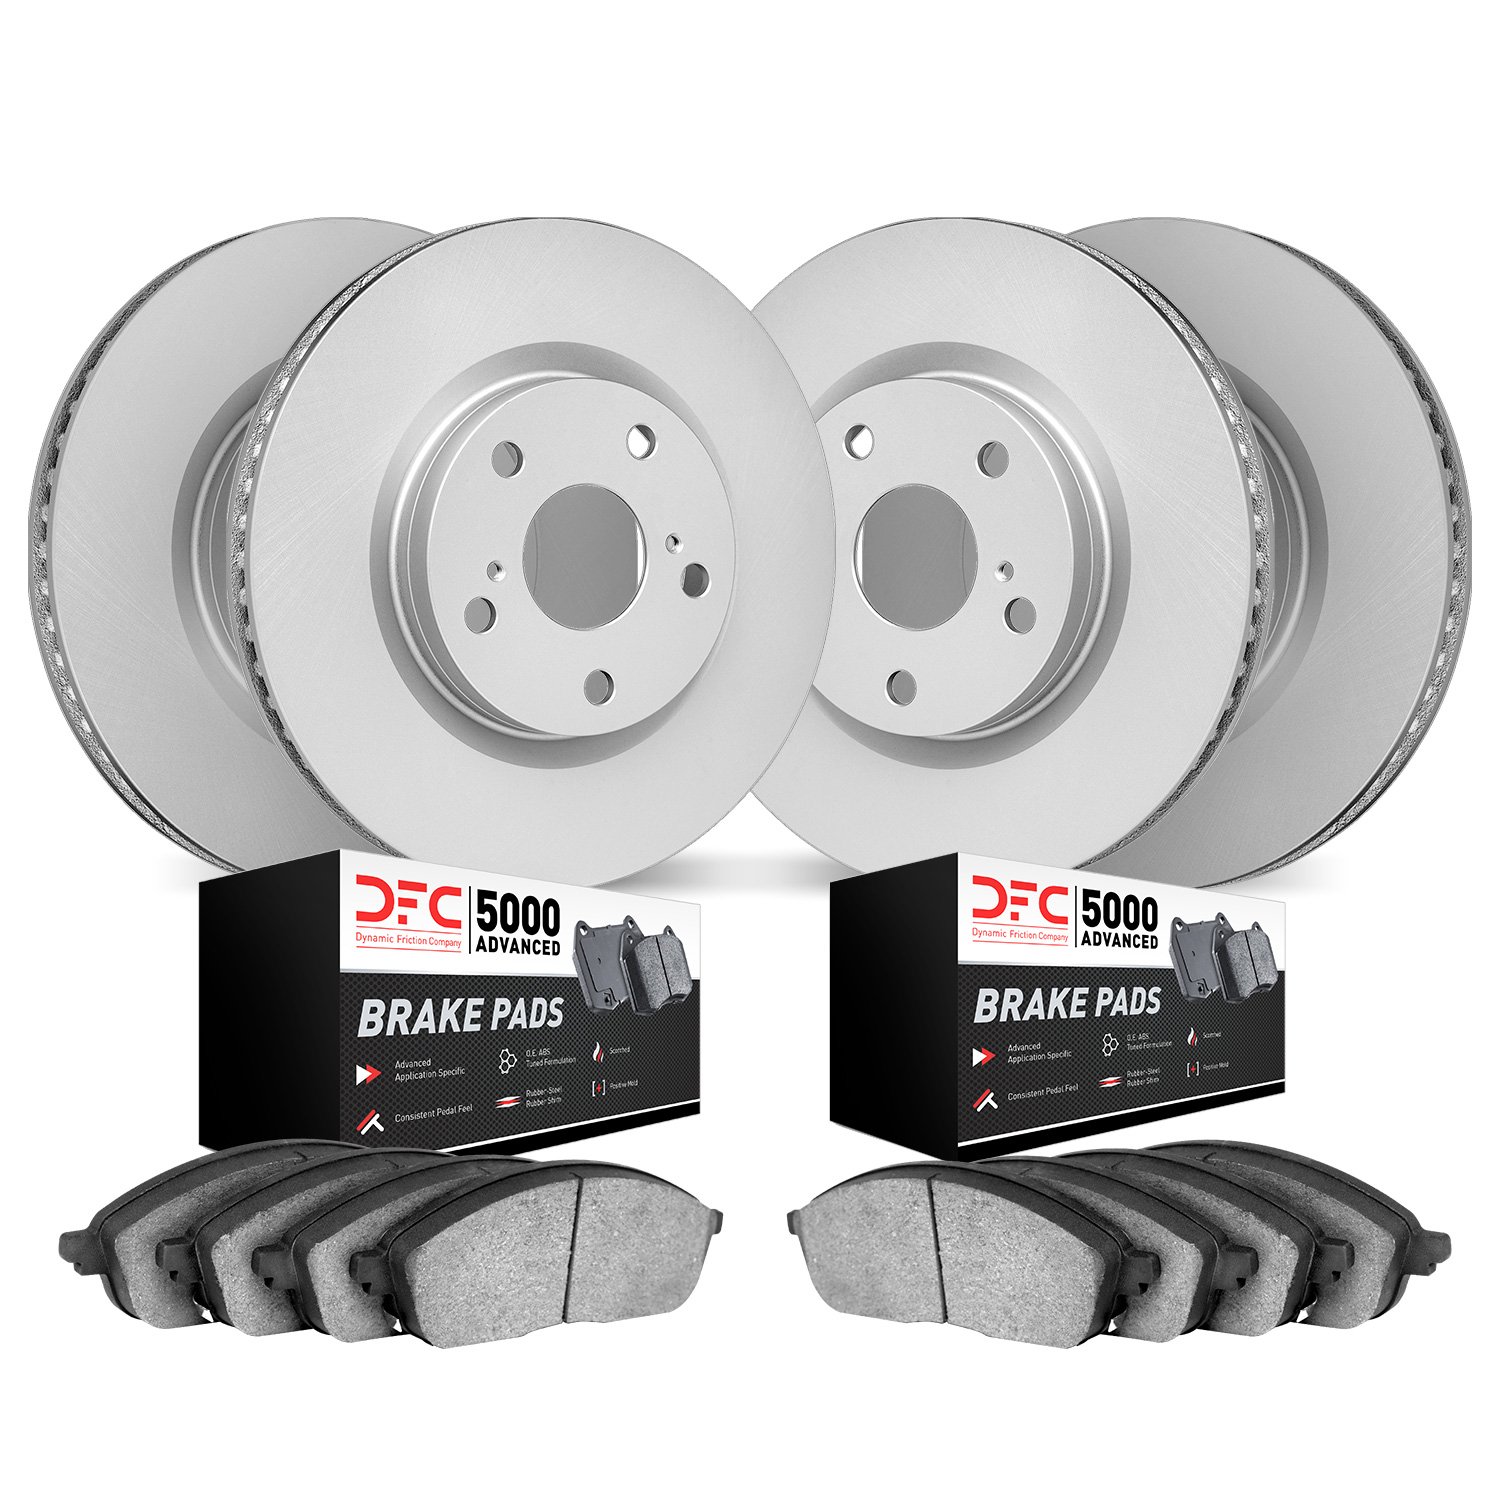 4504-46025 Geospec Brake Rotors w/5000 Advanced Brake Pads Kit, Fits Select GM, Position: Front and Rear